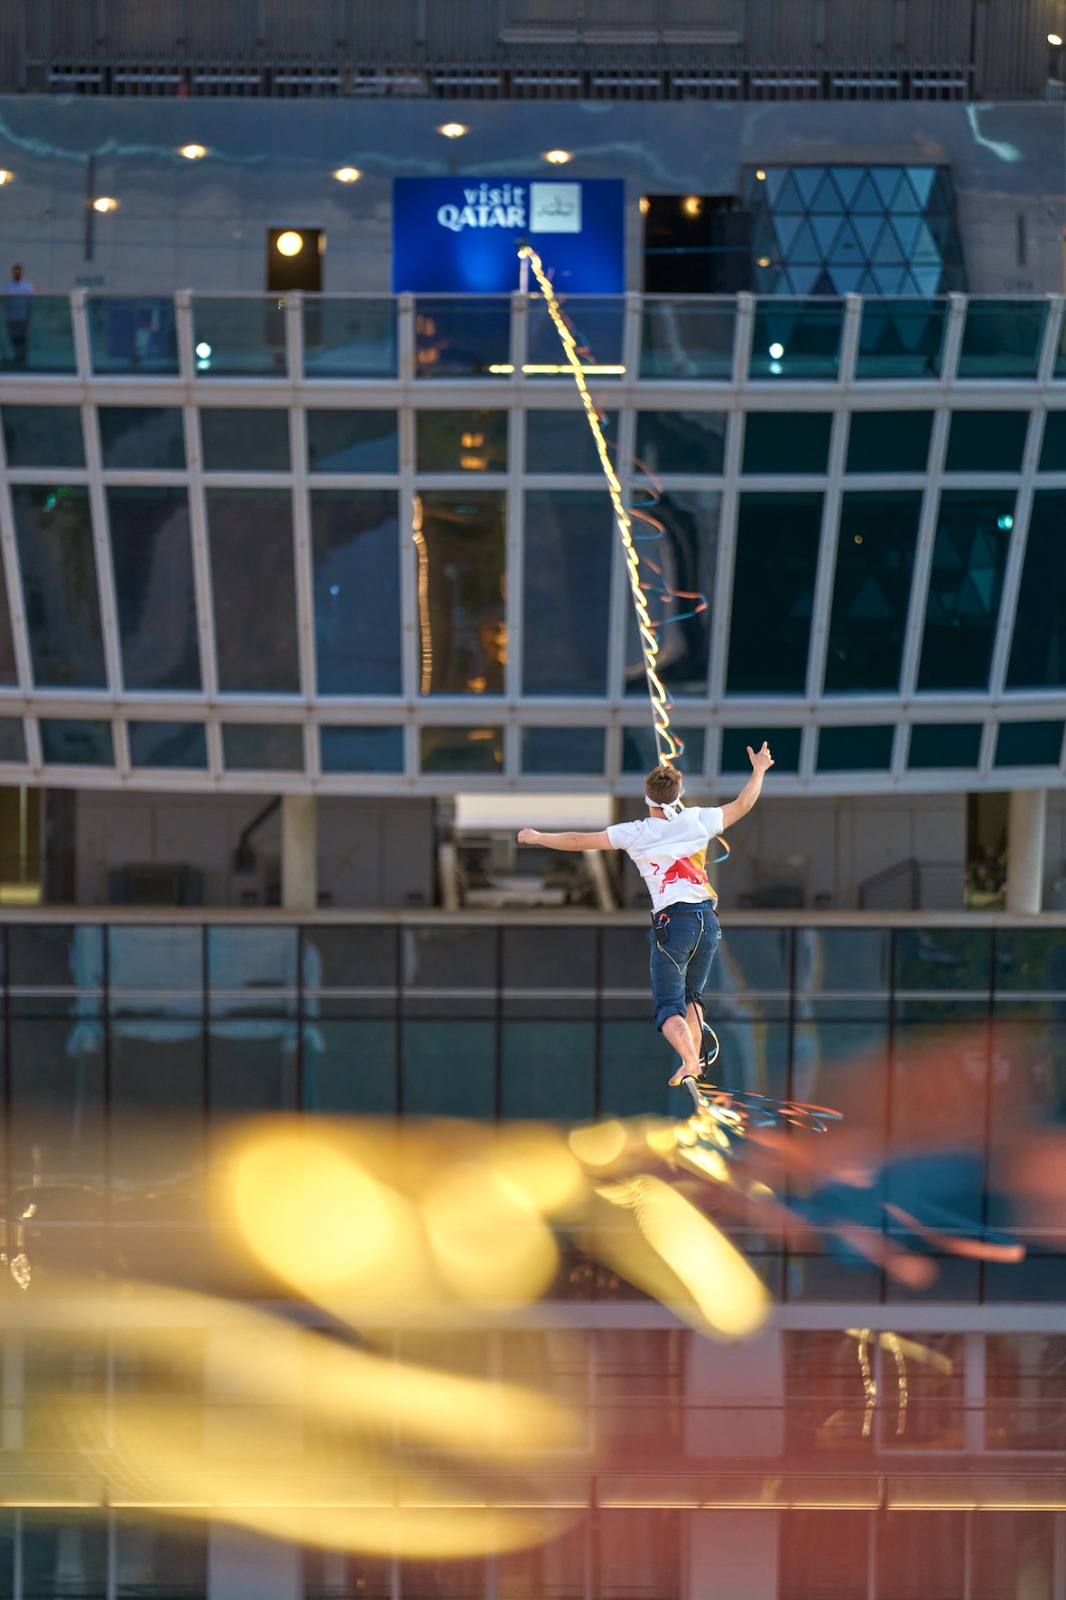 Red Bull athlete Jaan Roose on Sunday completed the world’s longest LED-lit, single building slackline walk in Qatar. (Supplied)